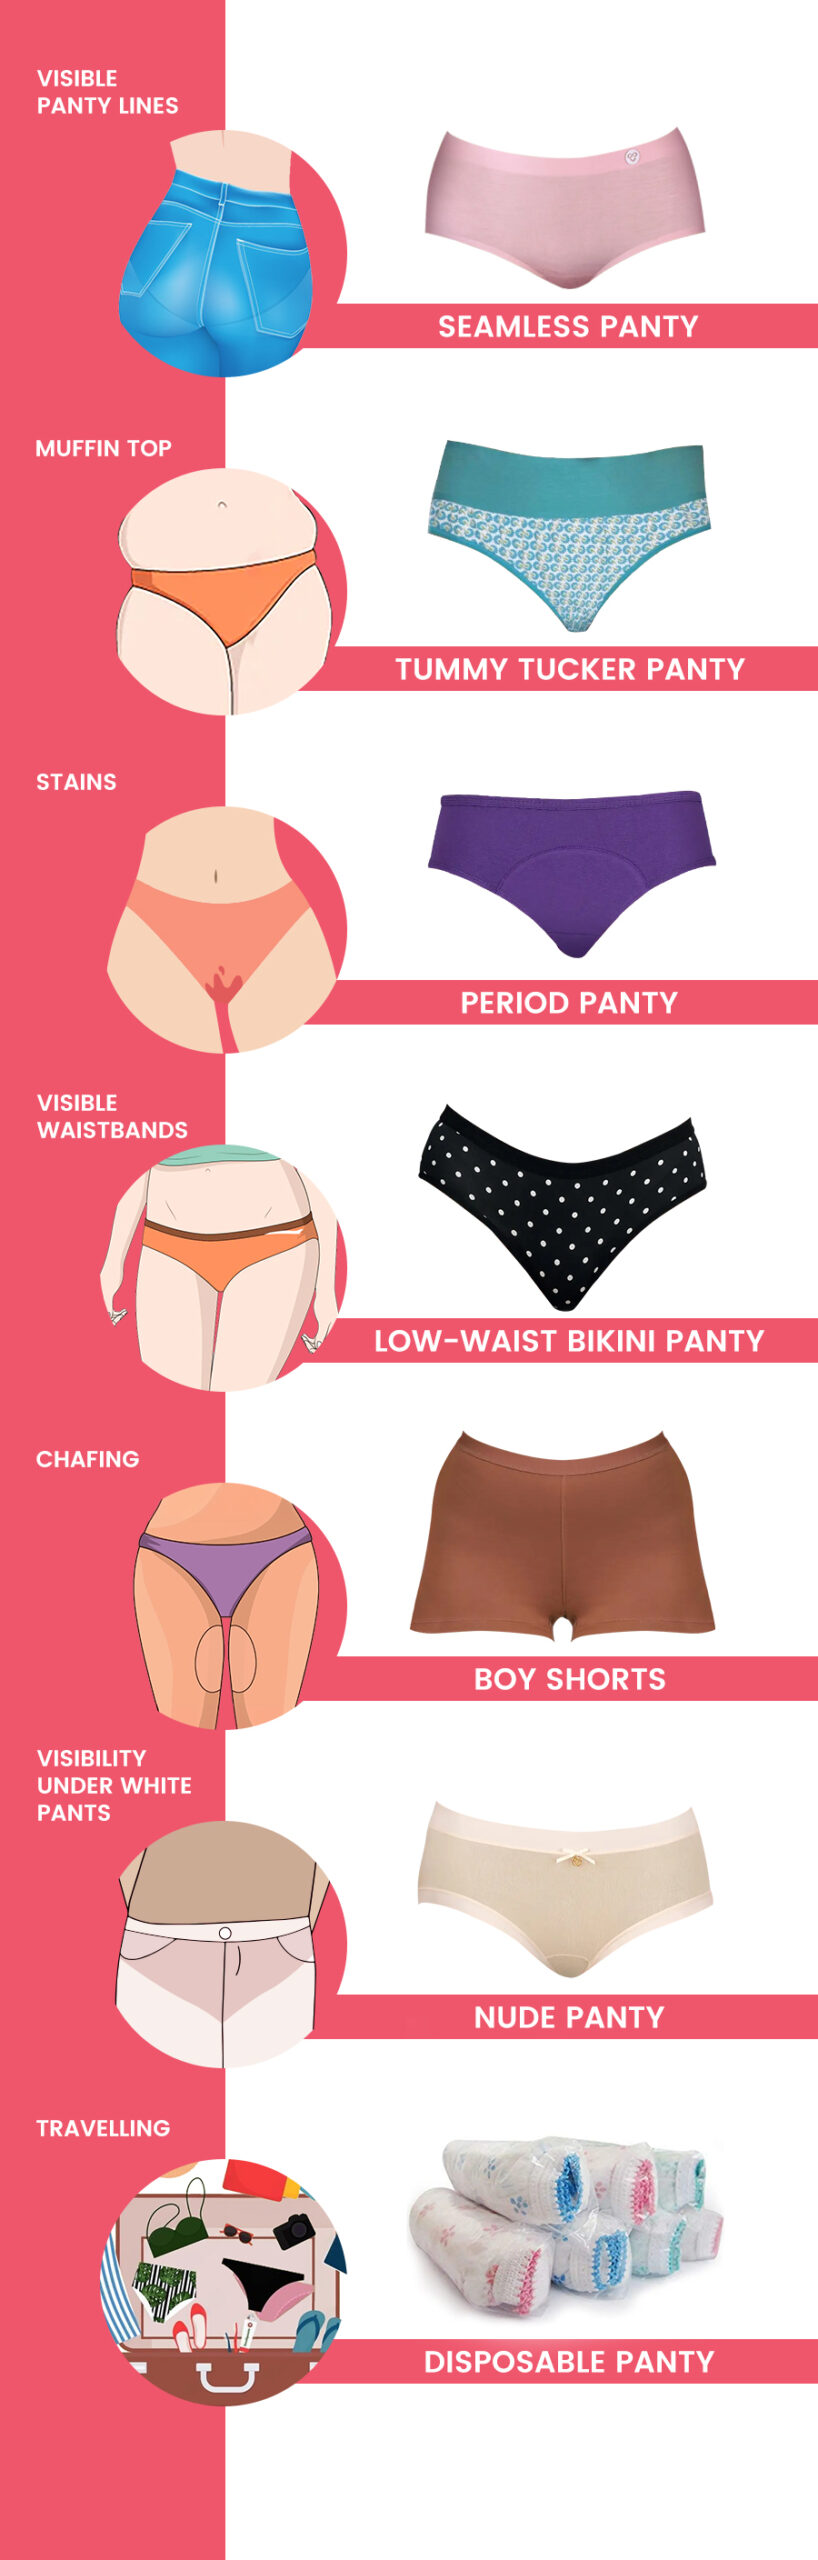 How Do You Choose the Right Panty